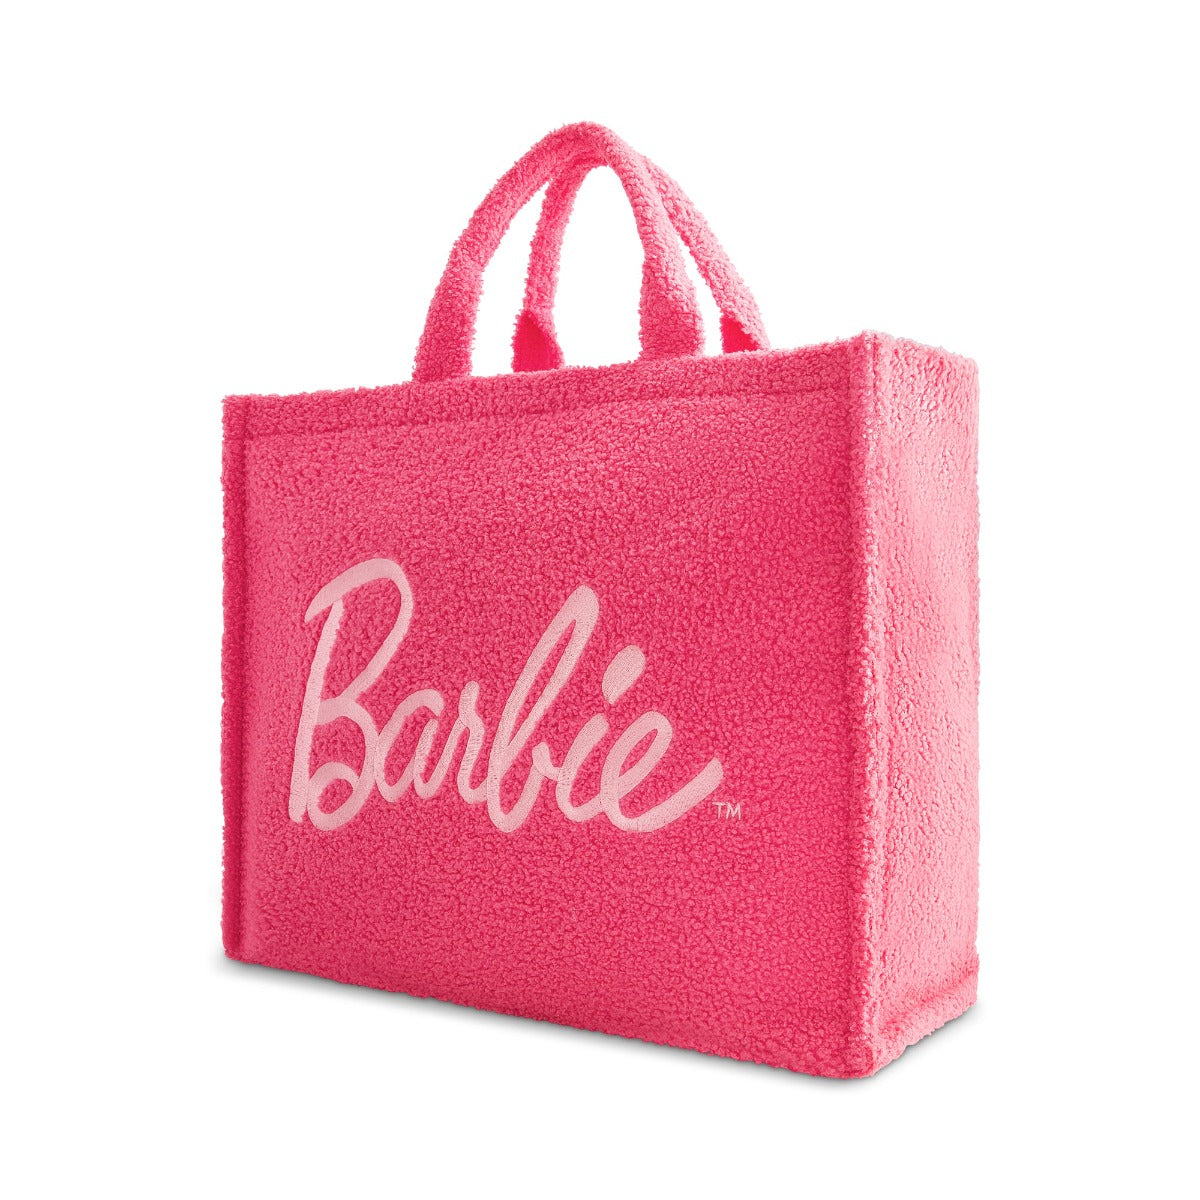 Pink Barbie large sherpa tote bag with trolley strap - cute bags for travel